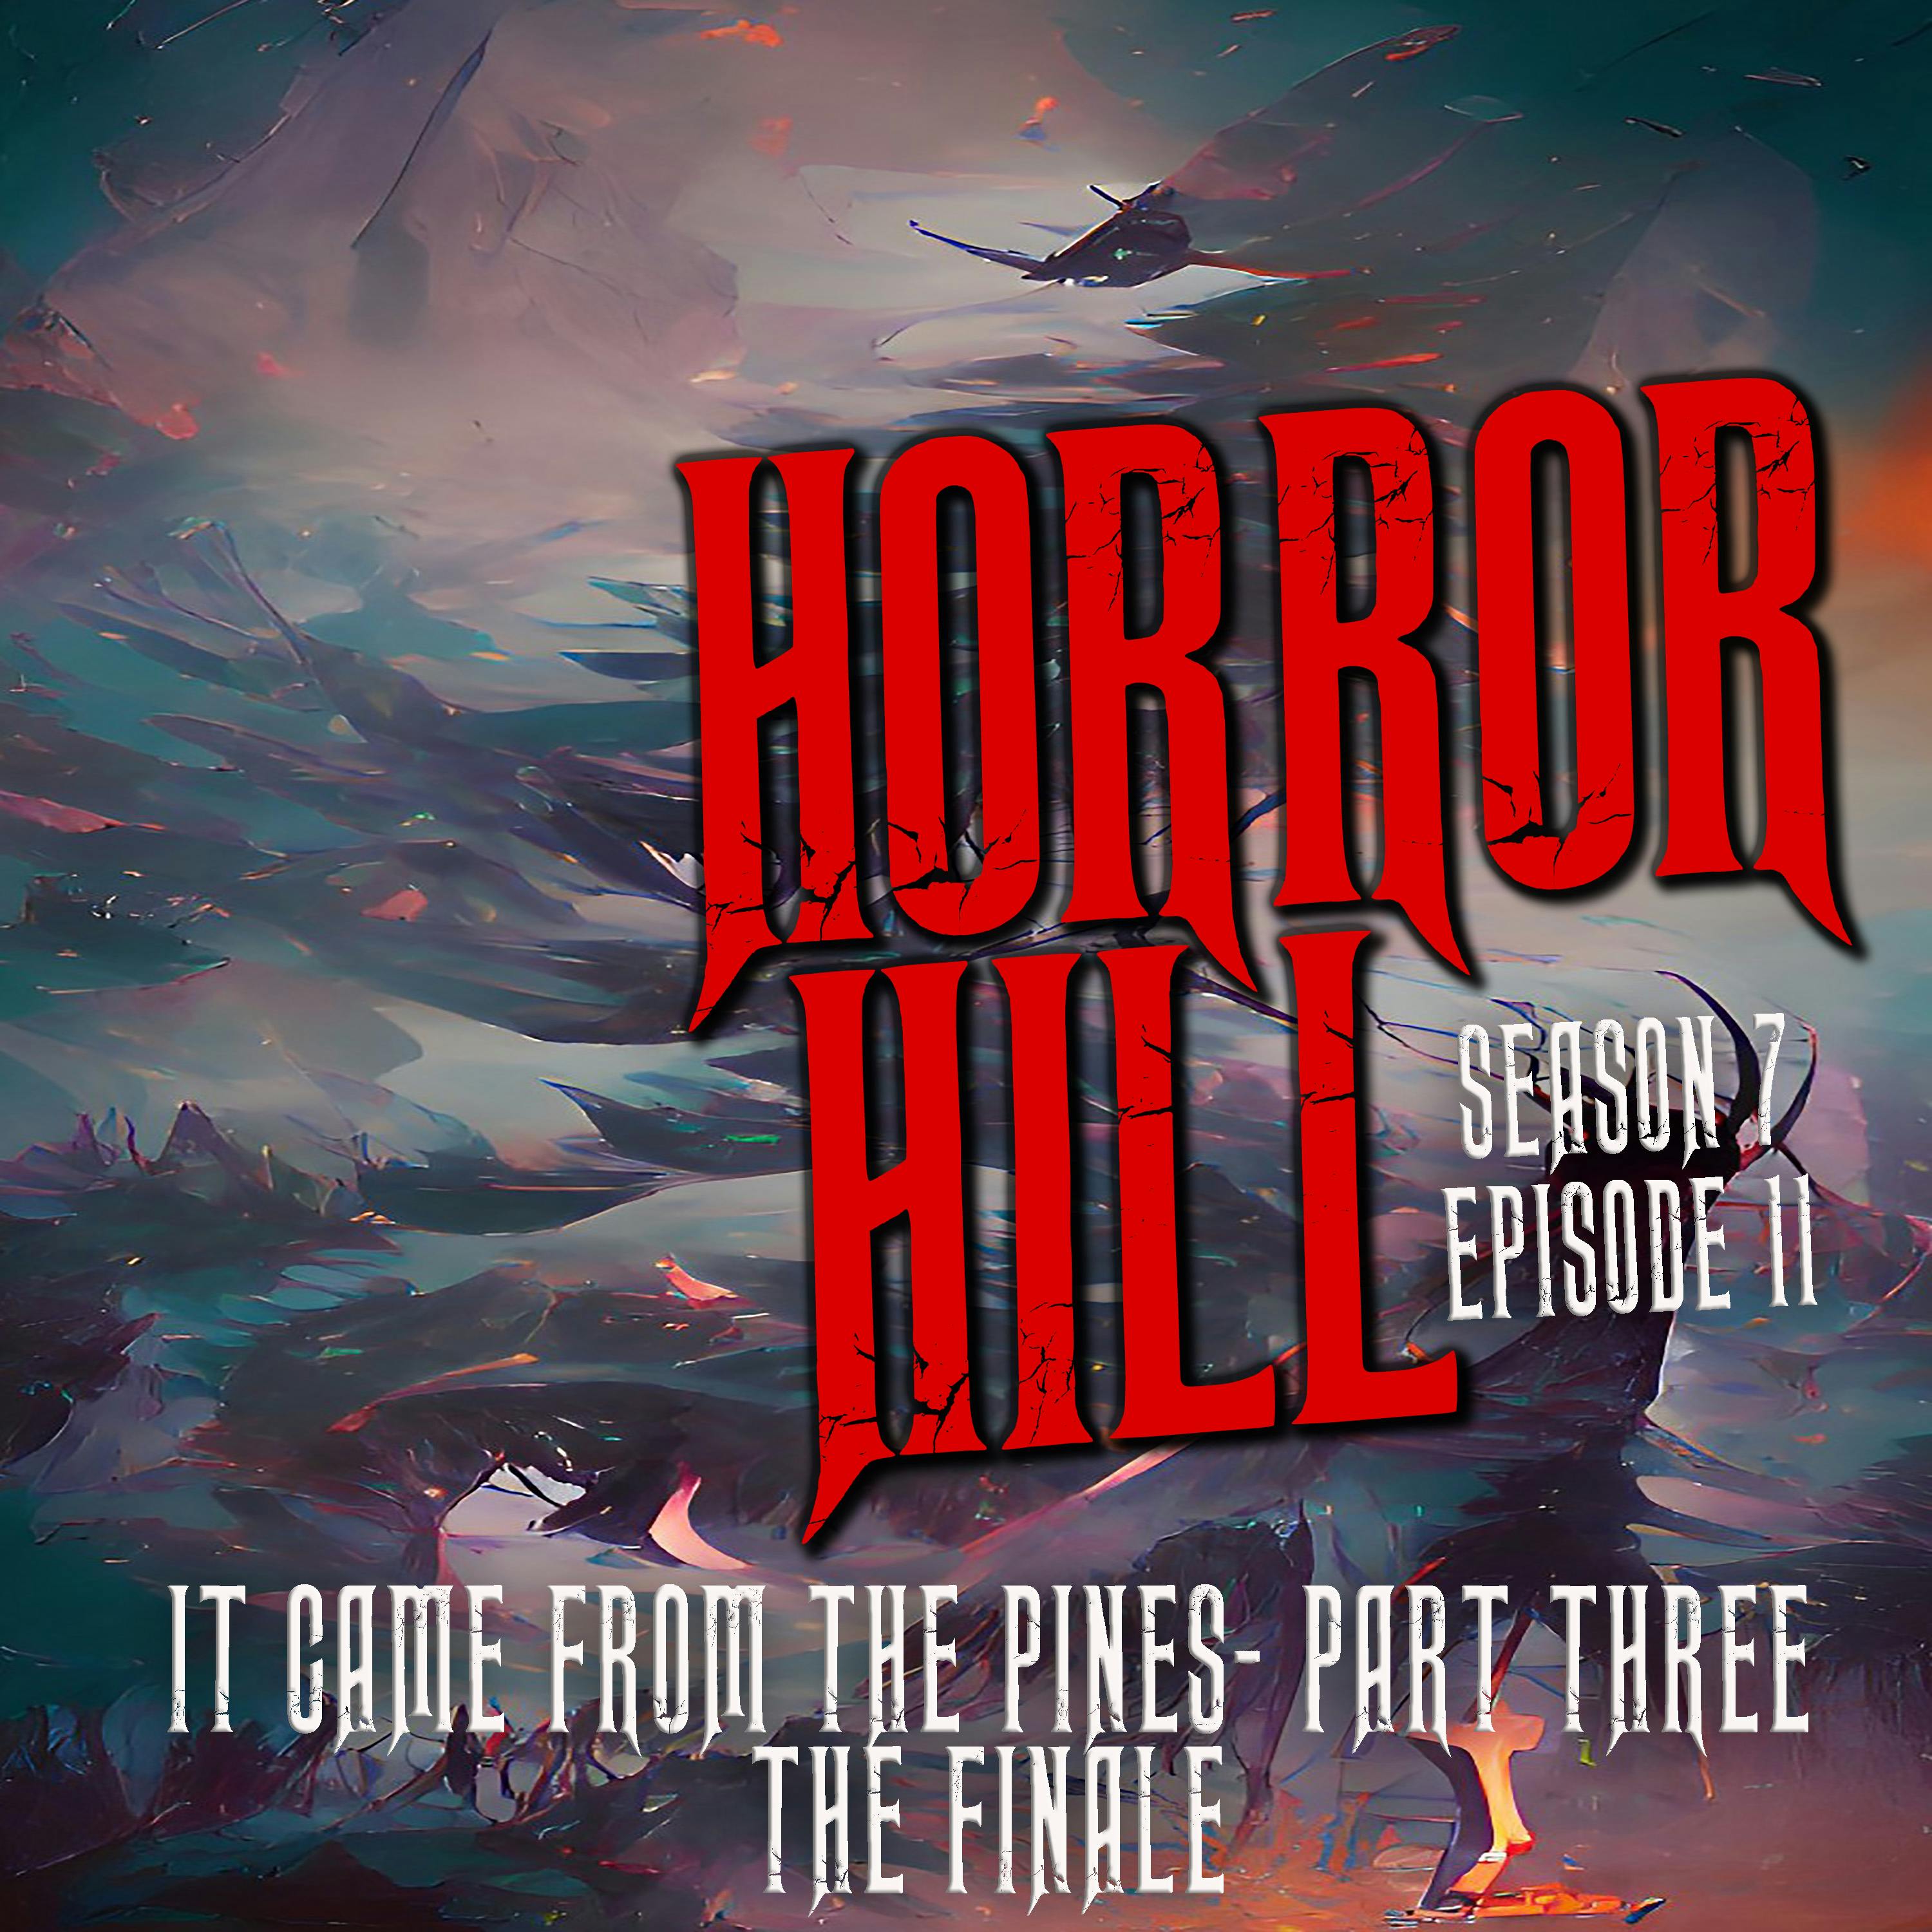 S7E11 - "It Came from the Pines - Part Three The Finale" - Horror Hill